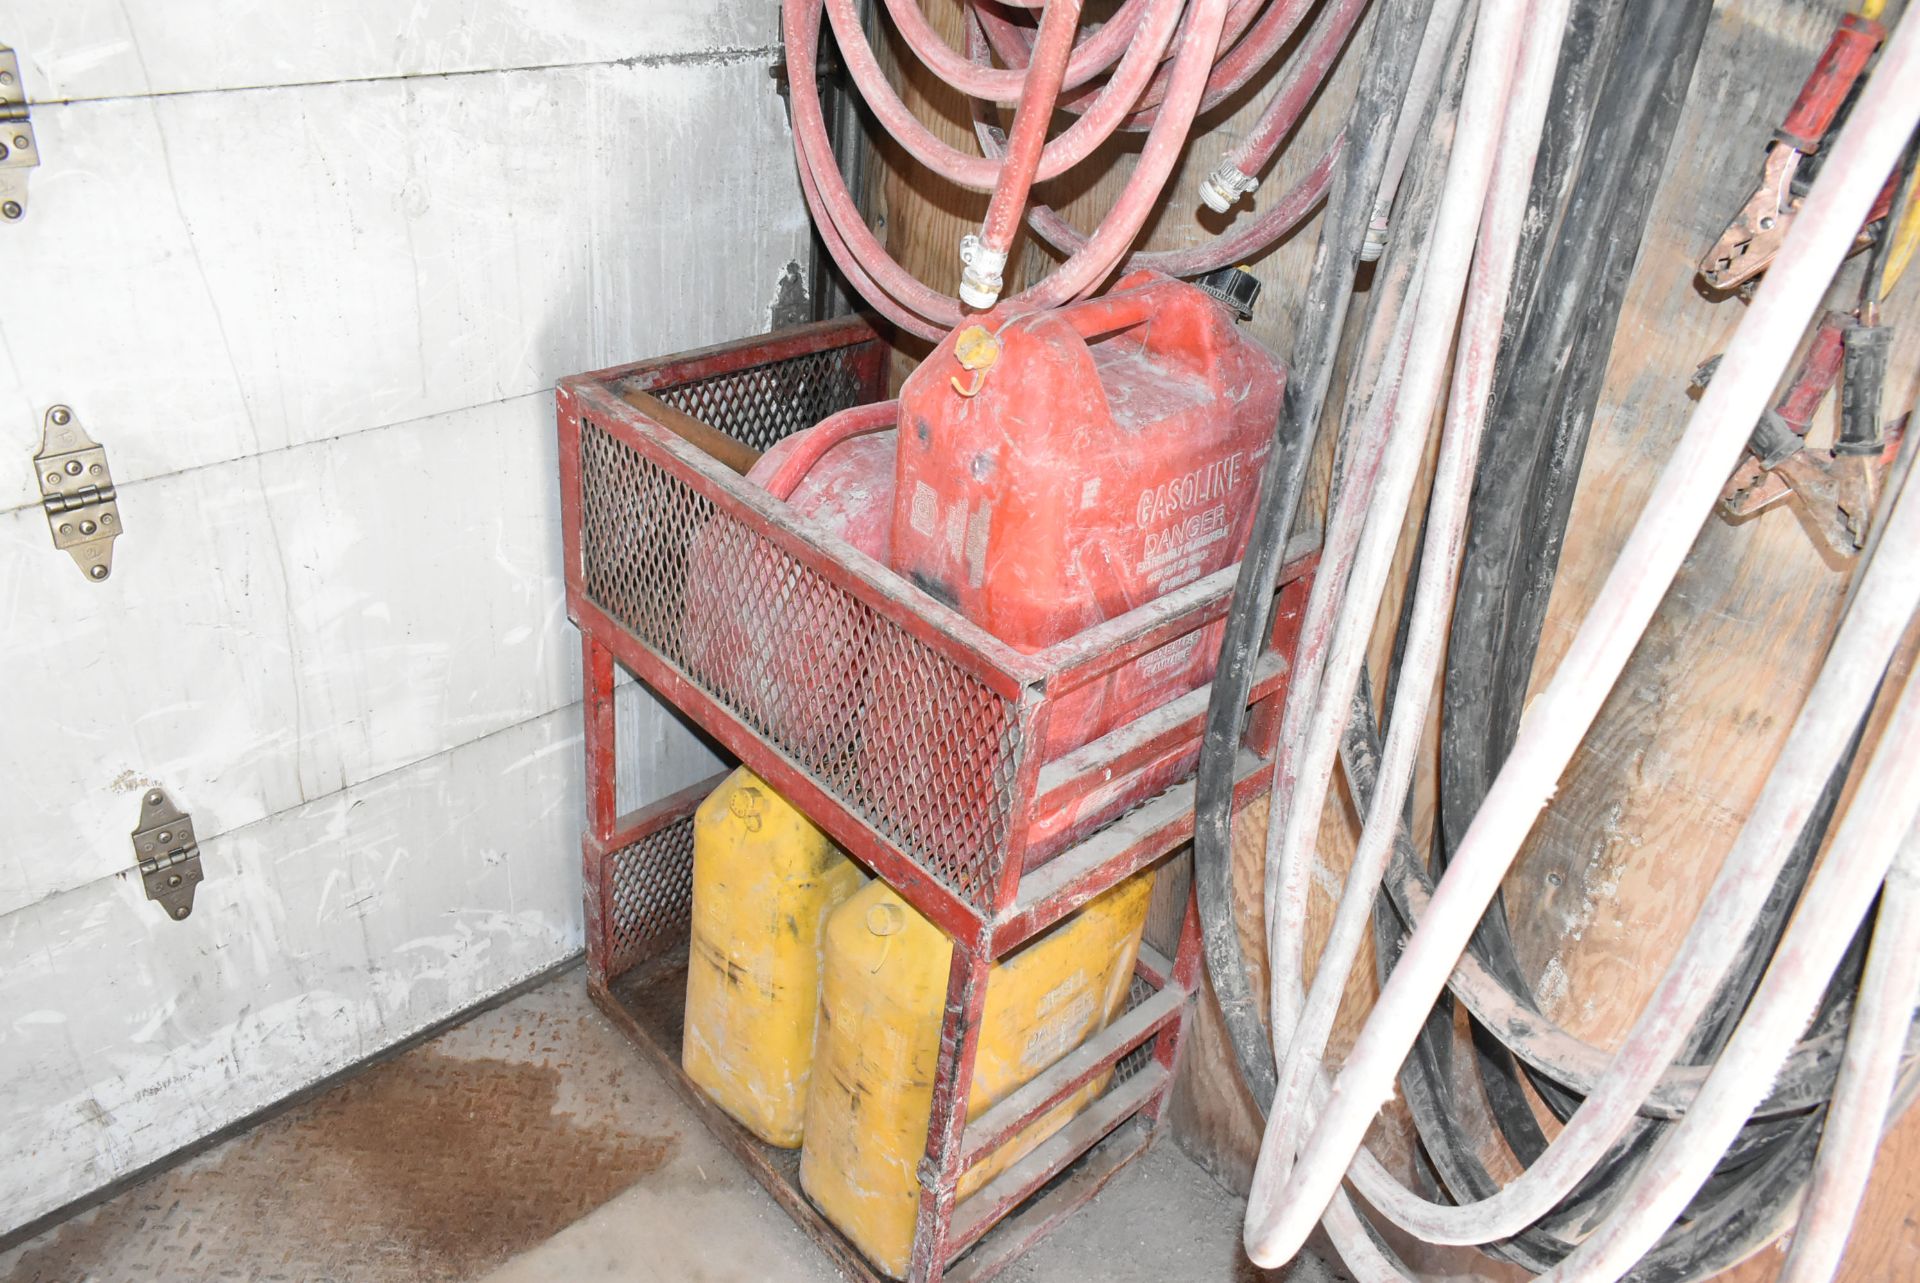 LOT/ REMAINING CONTENTS OF BOX CONSISTING OF HOSE, SUPPLIES, JERRY CANS & SHOVELS - Image 3 of 5